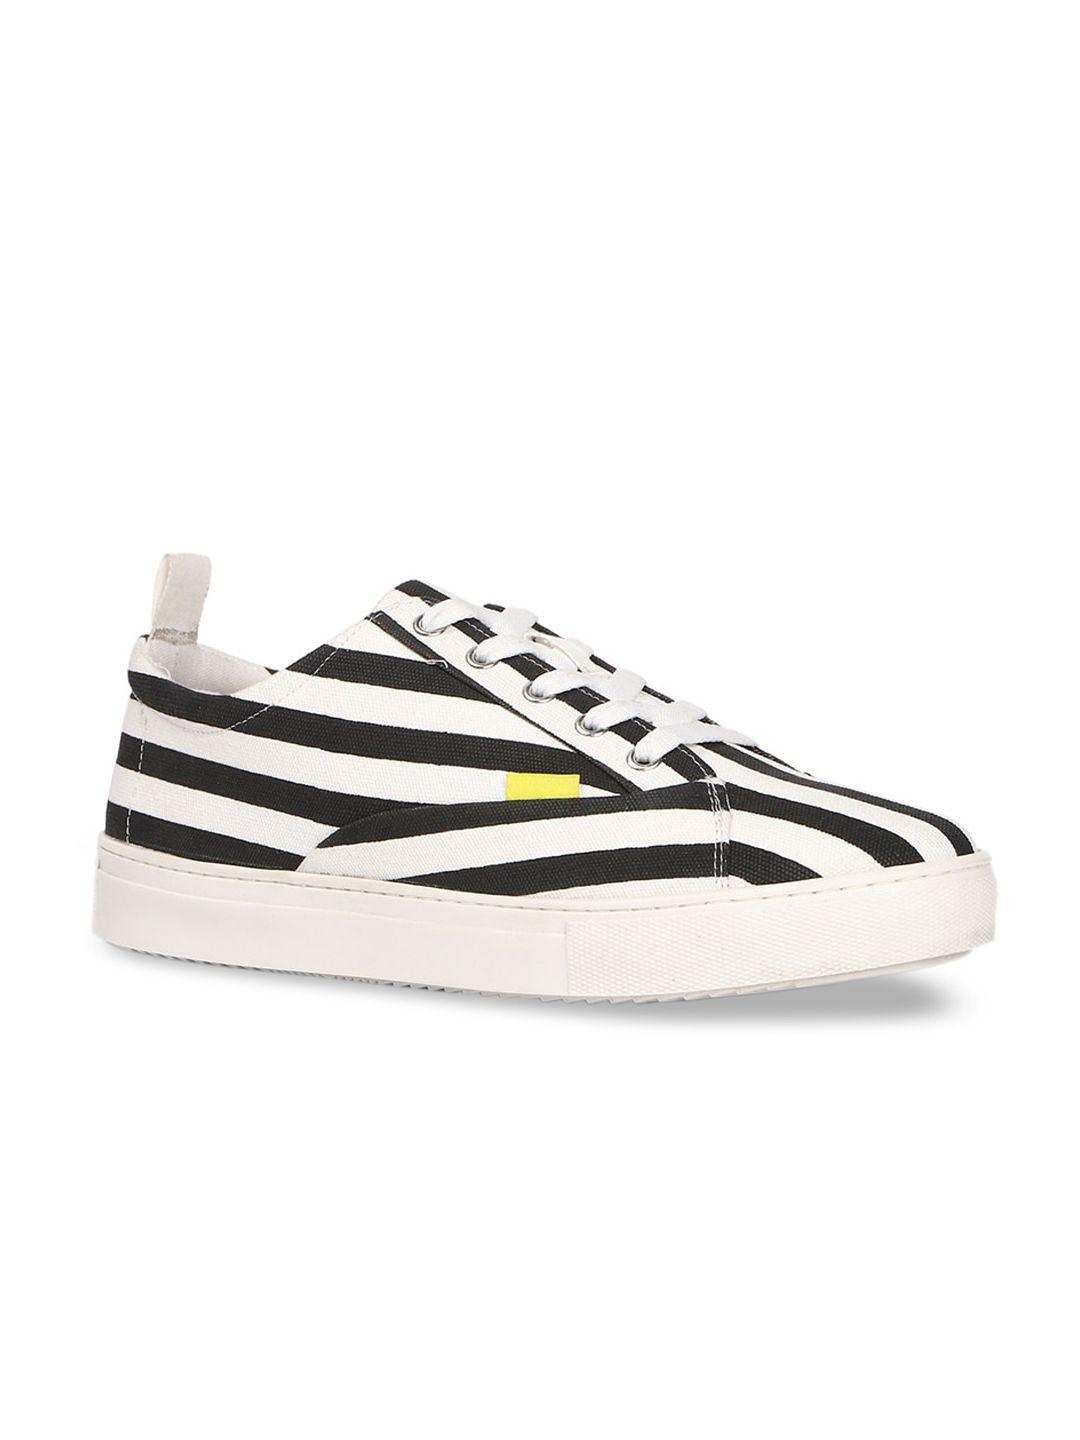 forever 21 men white & black striped pu sneakers casual shoes